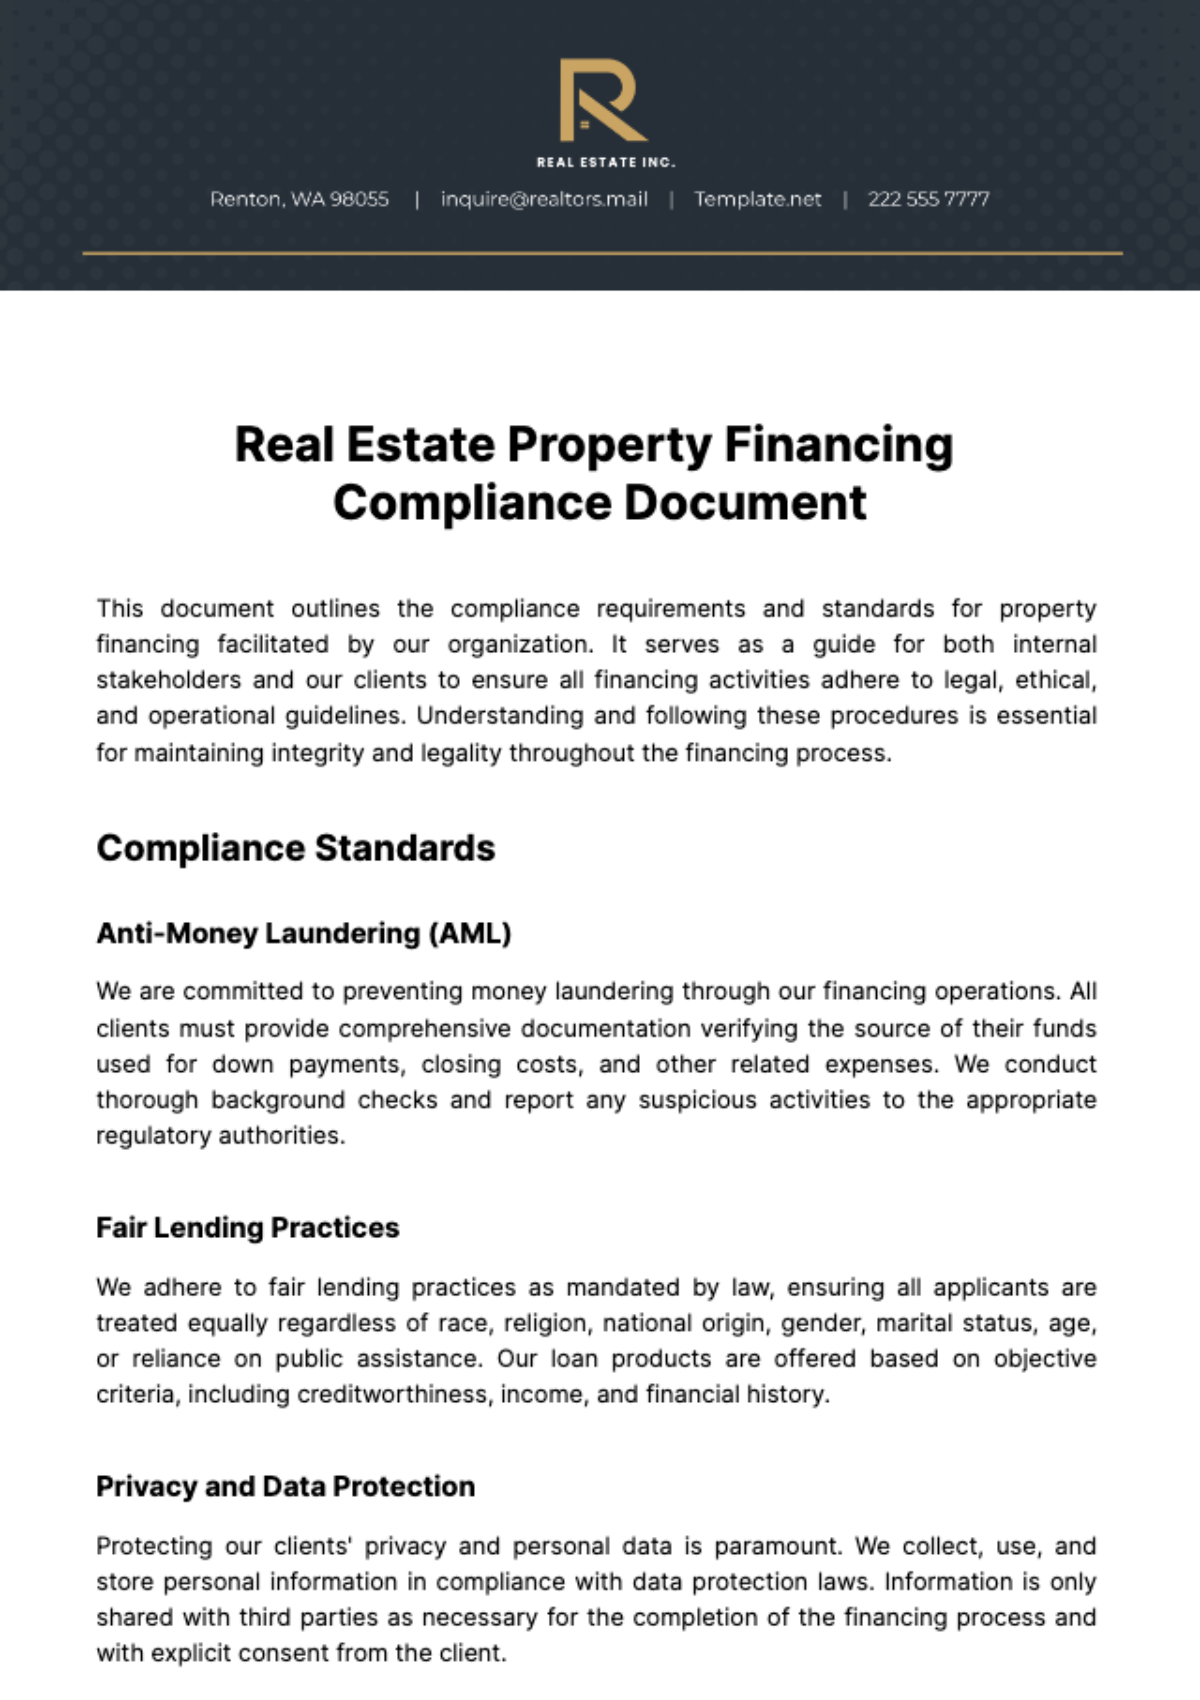 Real Estate Property Financing Compliance Document Template